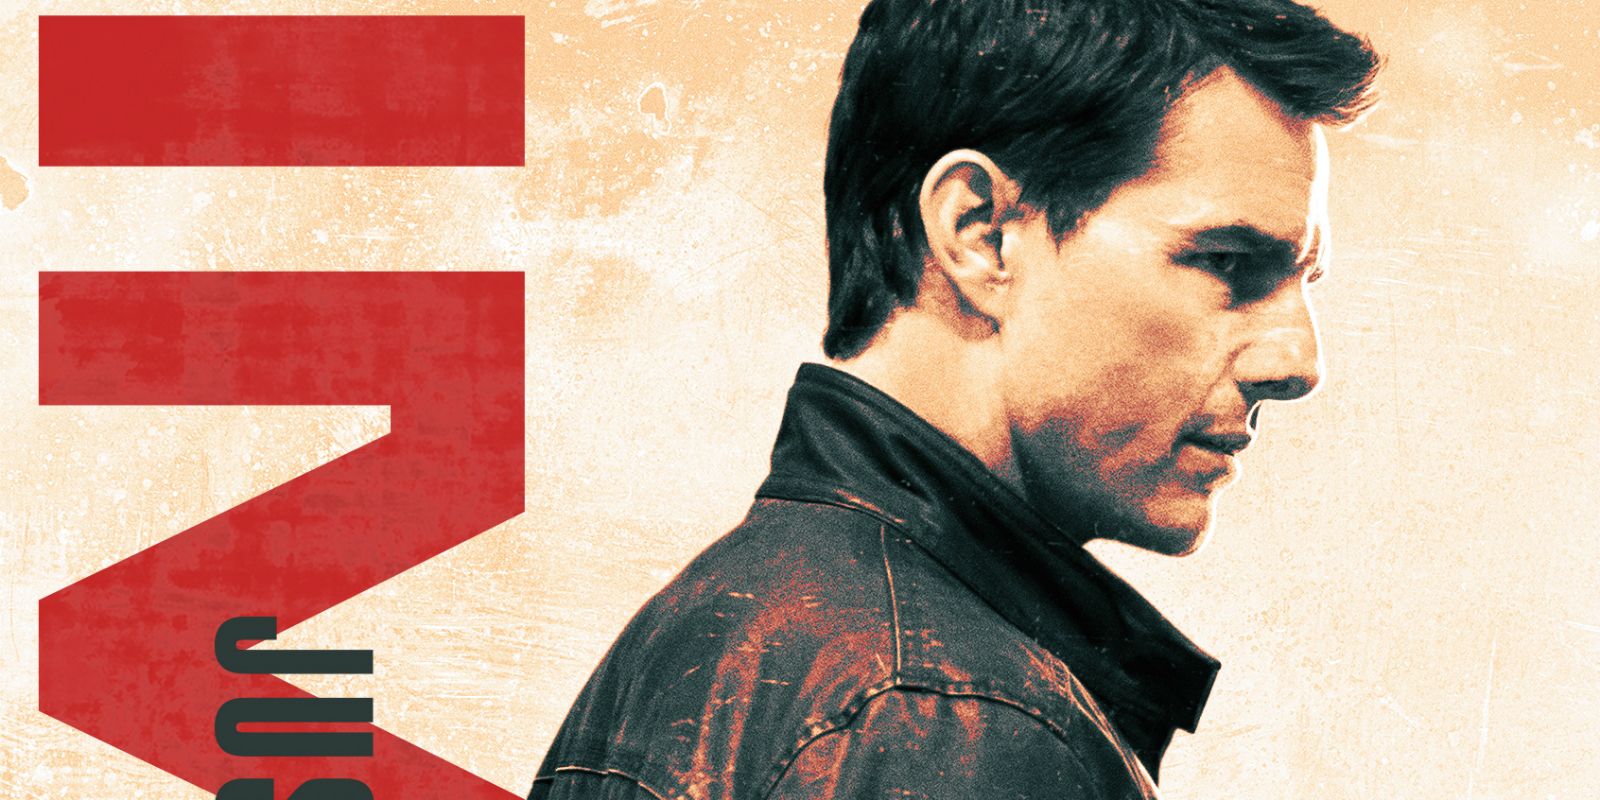 Jack Reacher 2 IMAX Trailer: That's Excitement in Tom Cruise's Voice